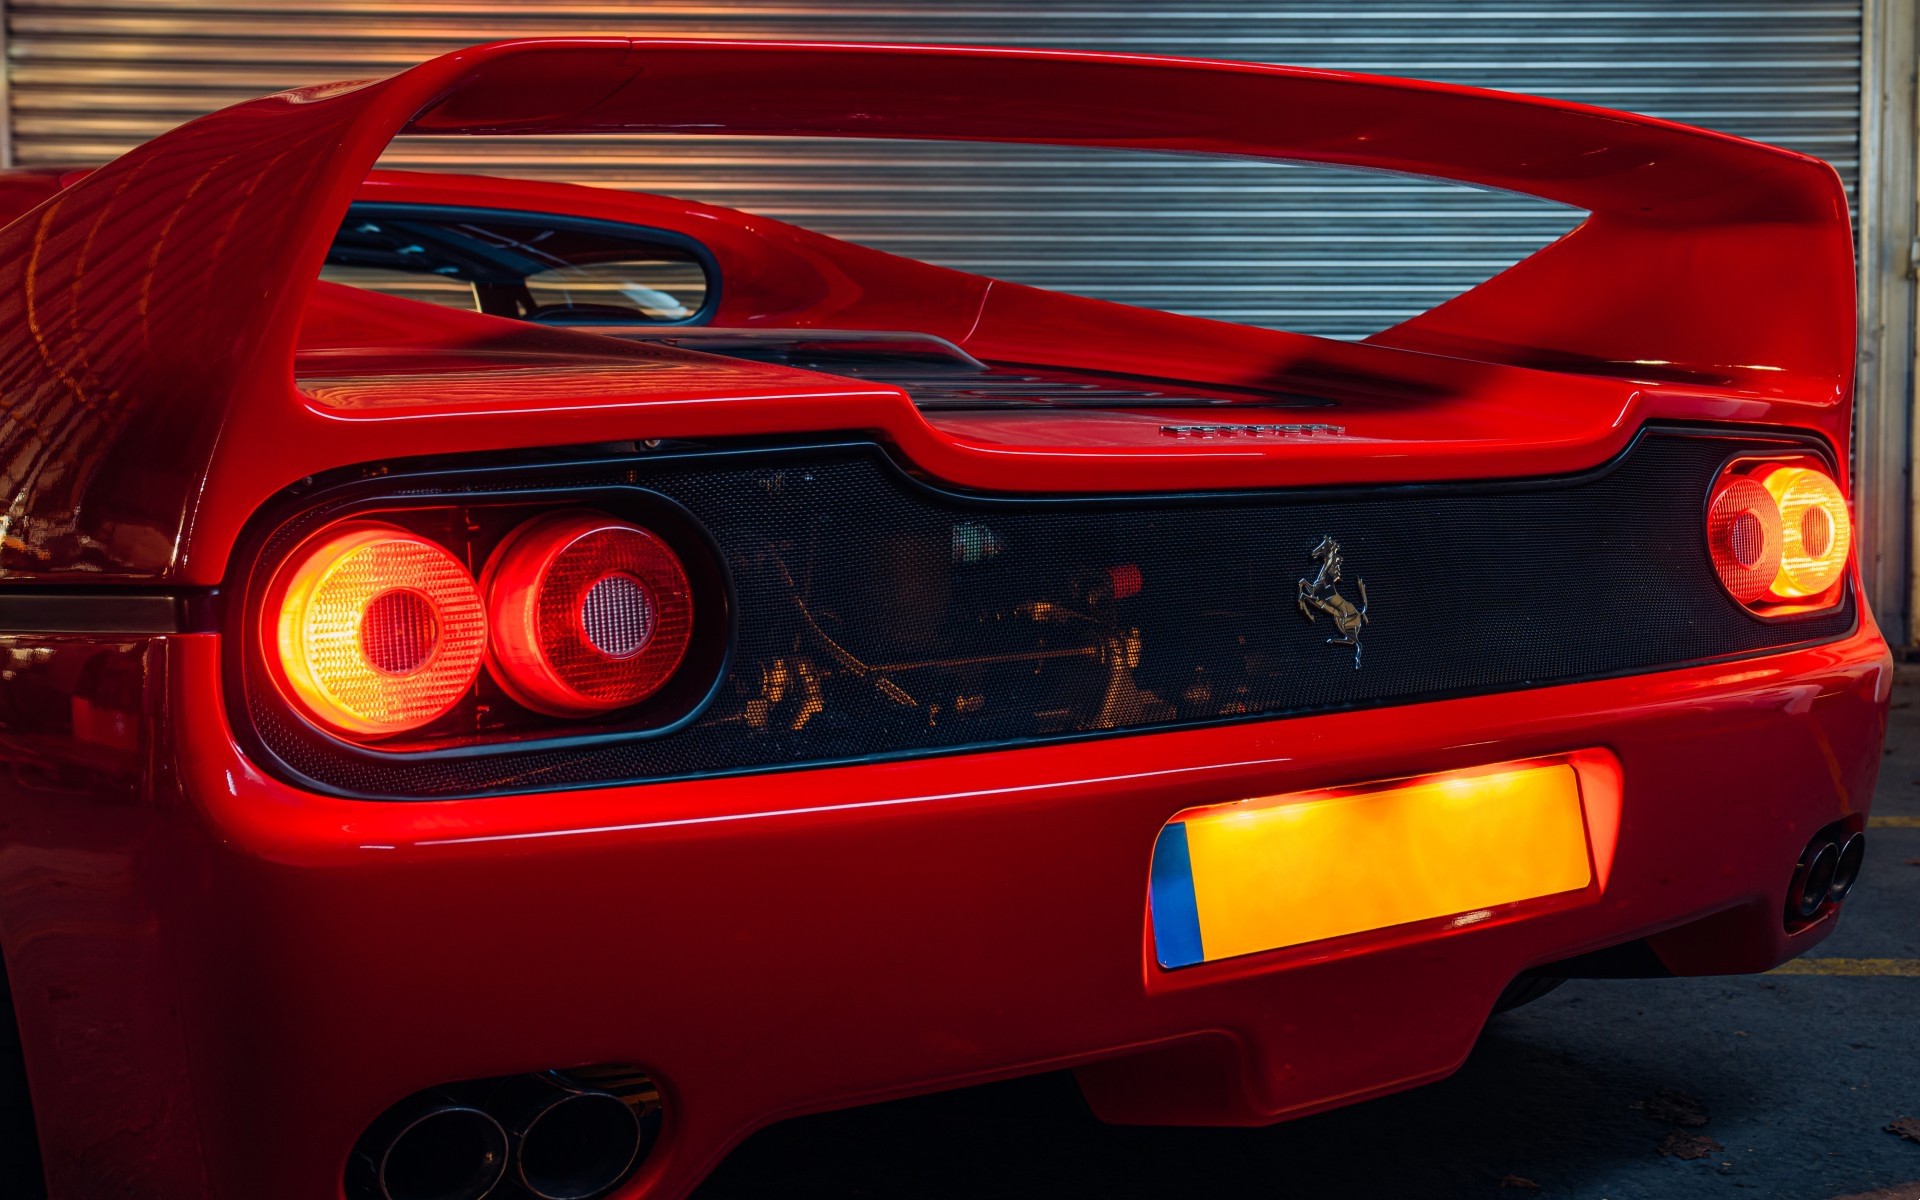 Distinctive rear-end of the F50